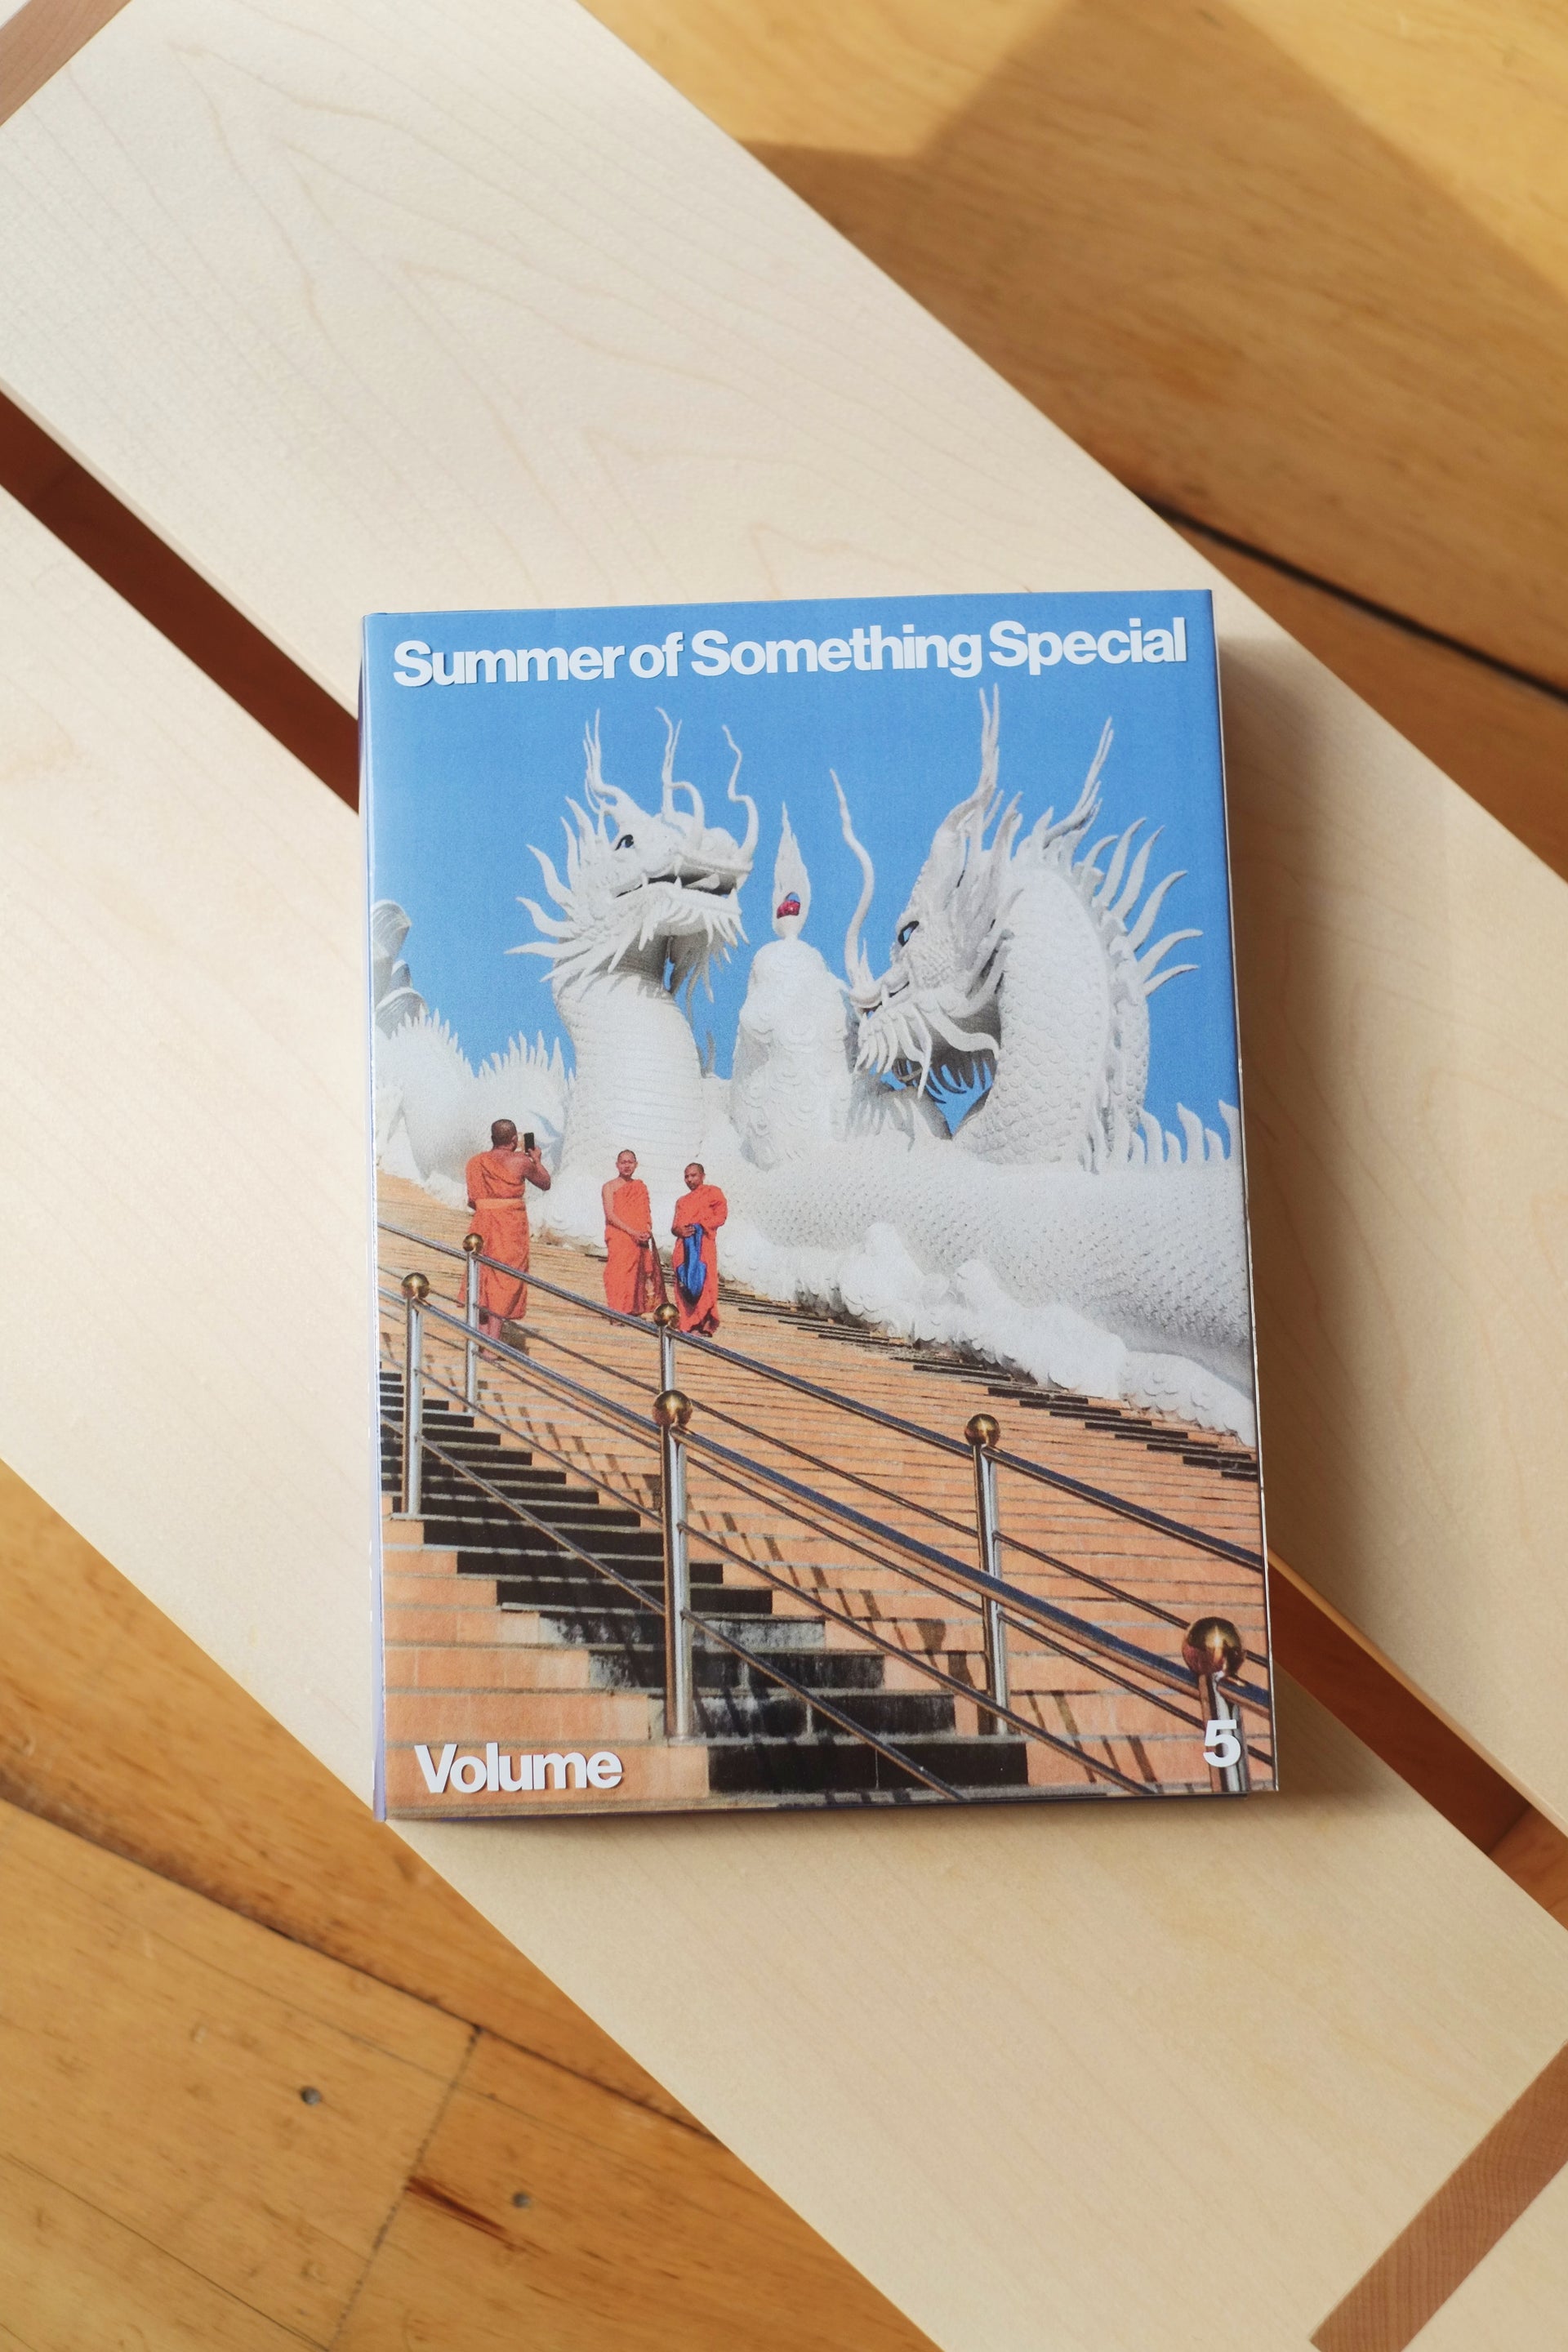 Summer of Something Special Volume: 5